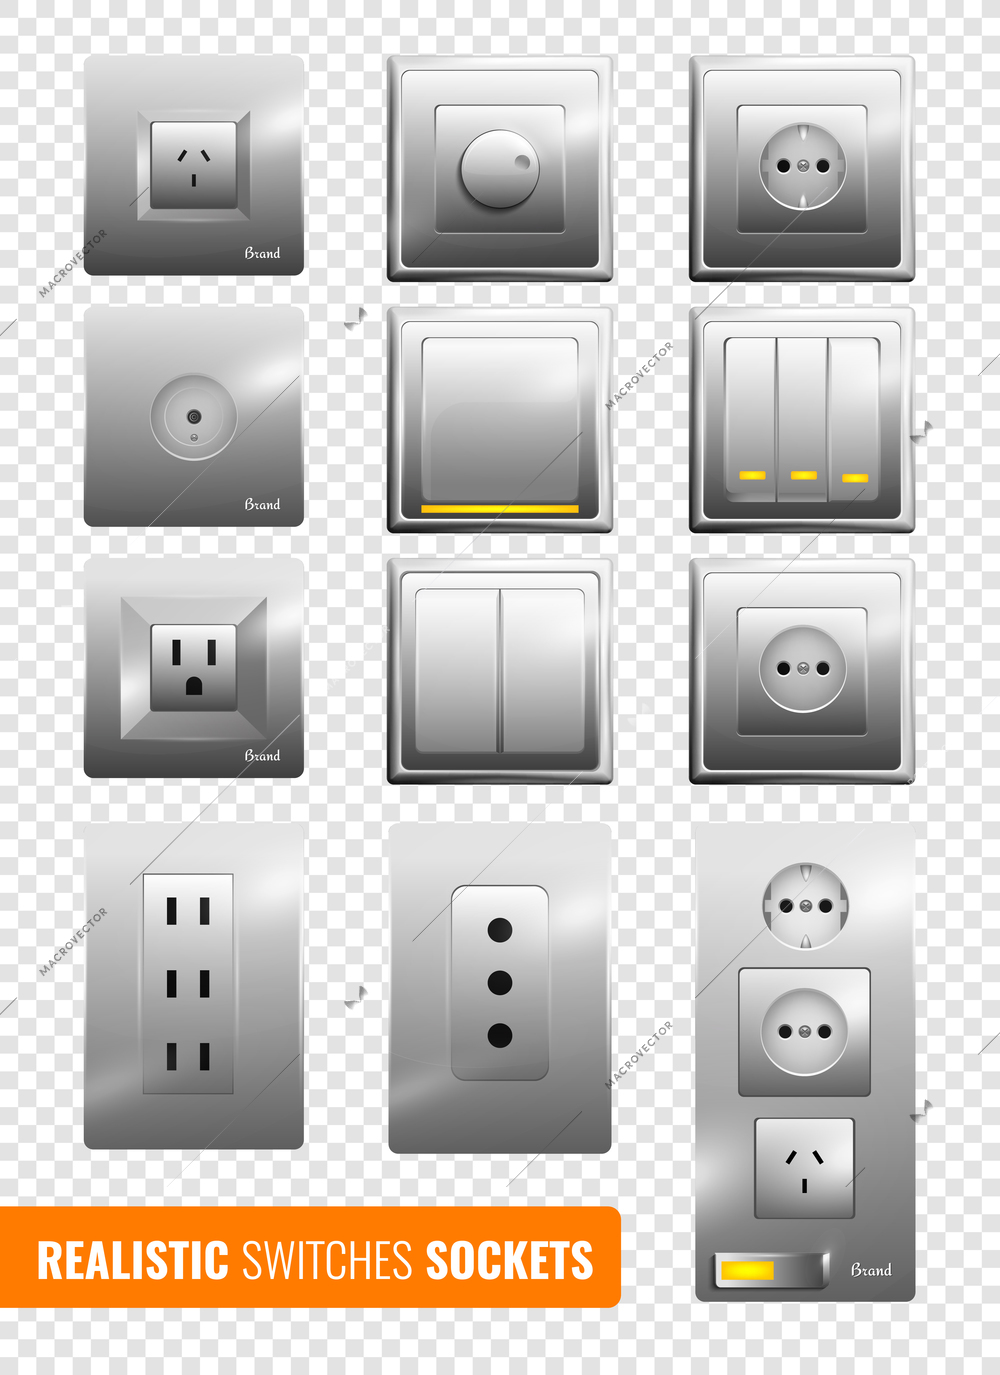 Set of realistic wall electrical switches and sockets with reflection on transparent background isolated vector illustration